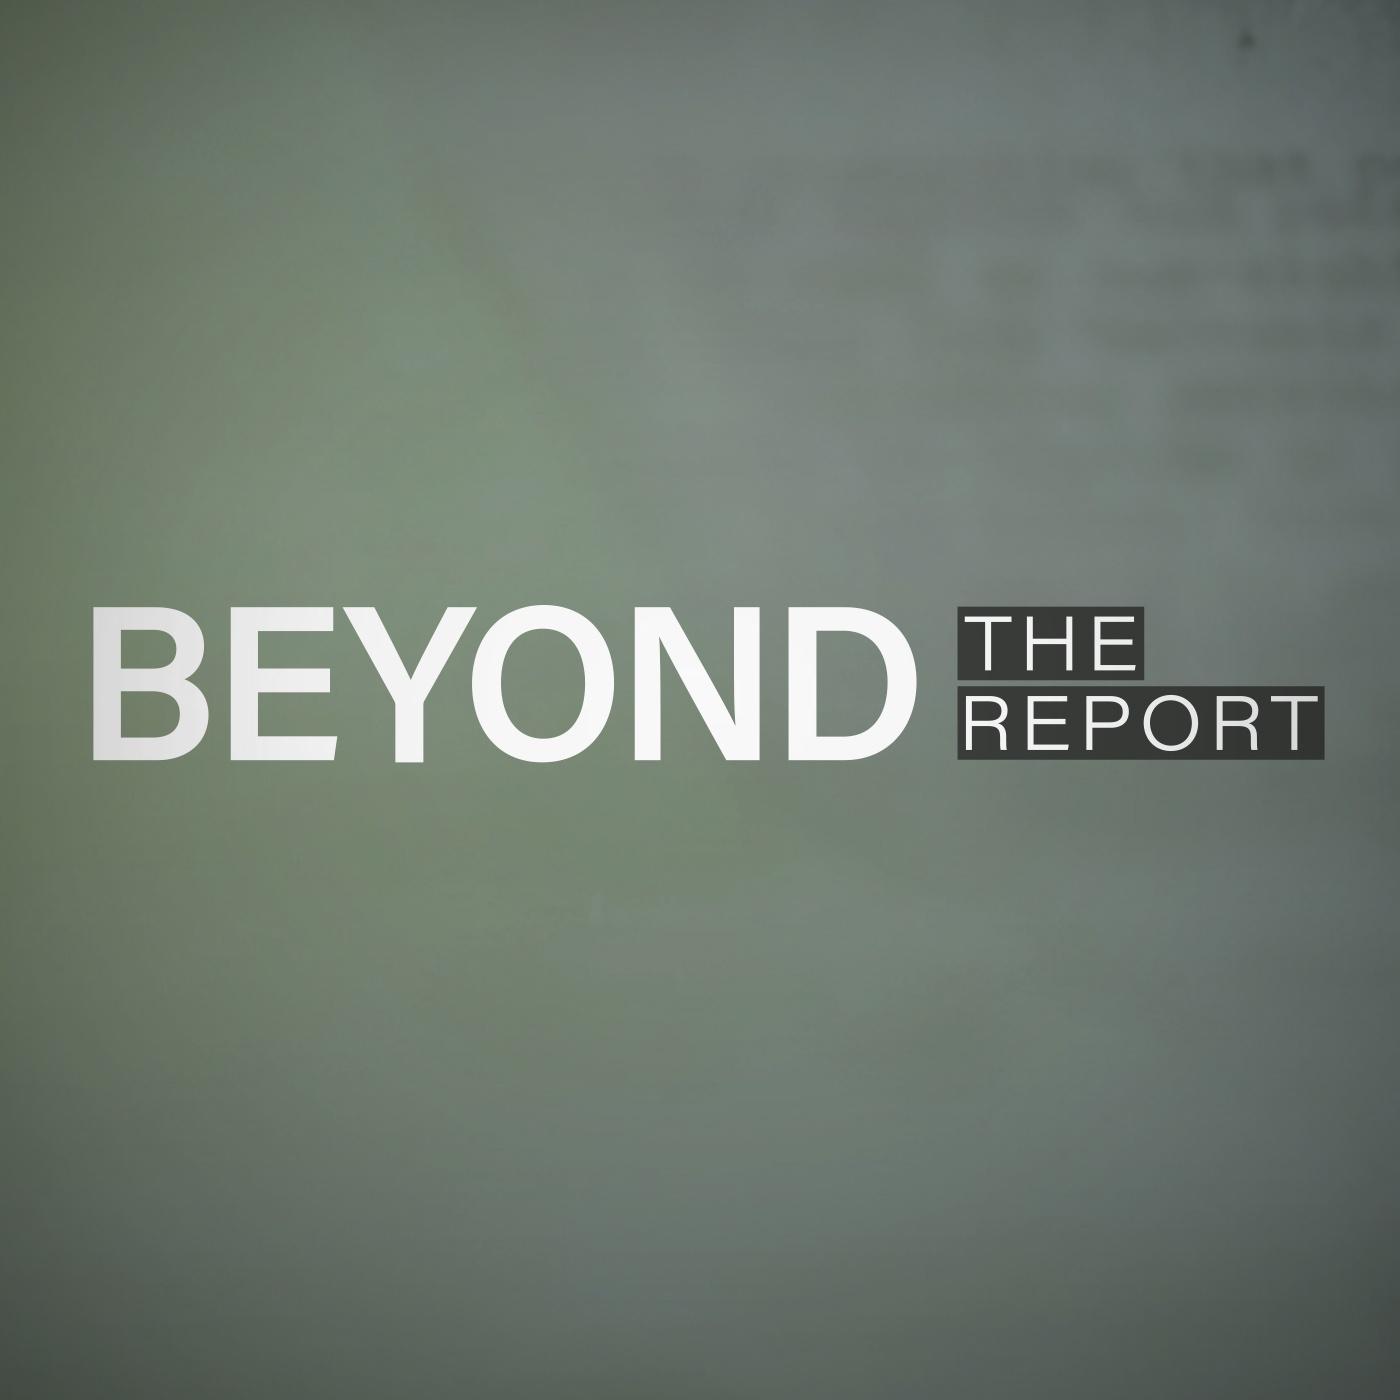 Beyond the Report